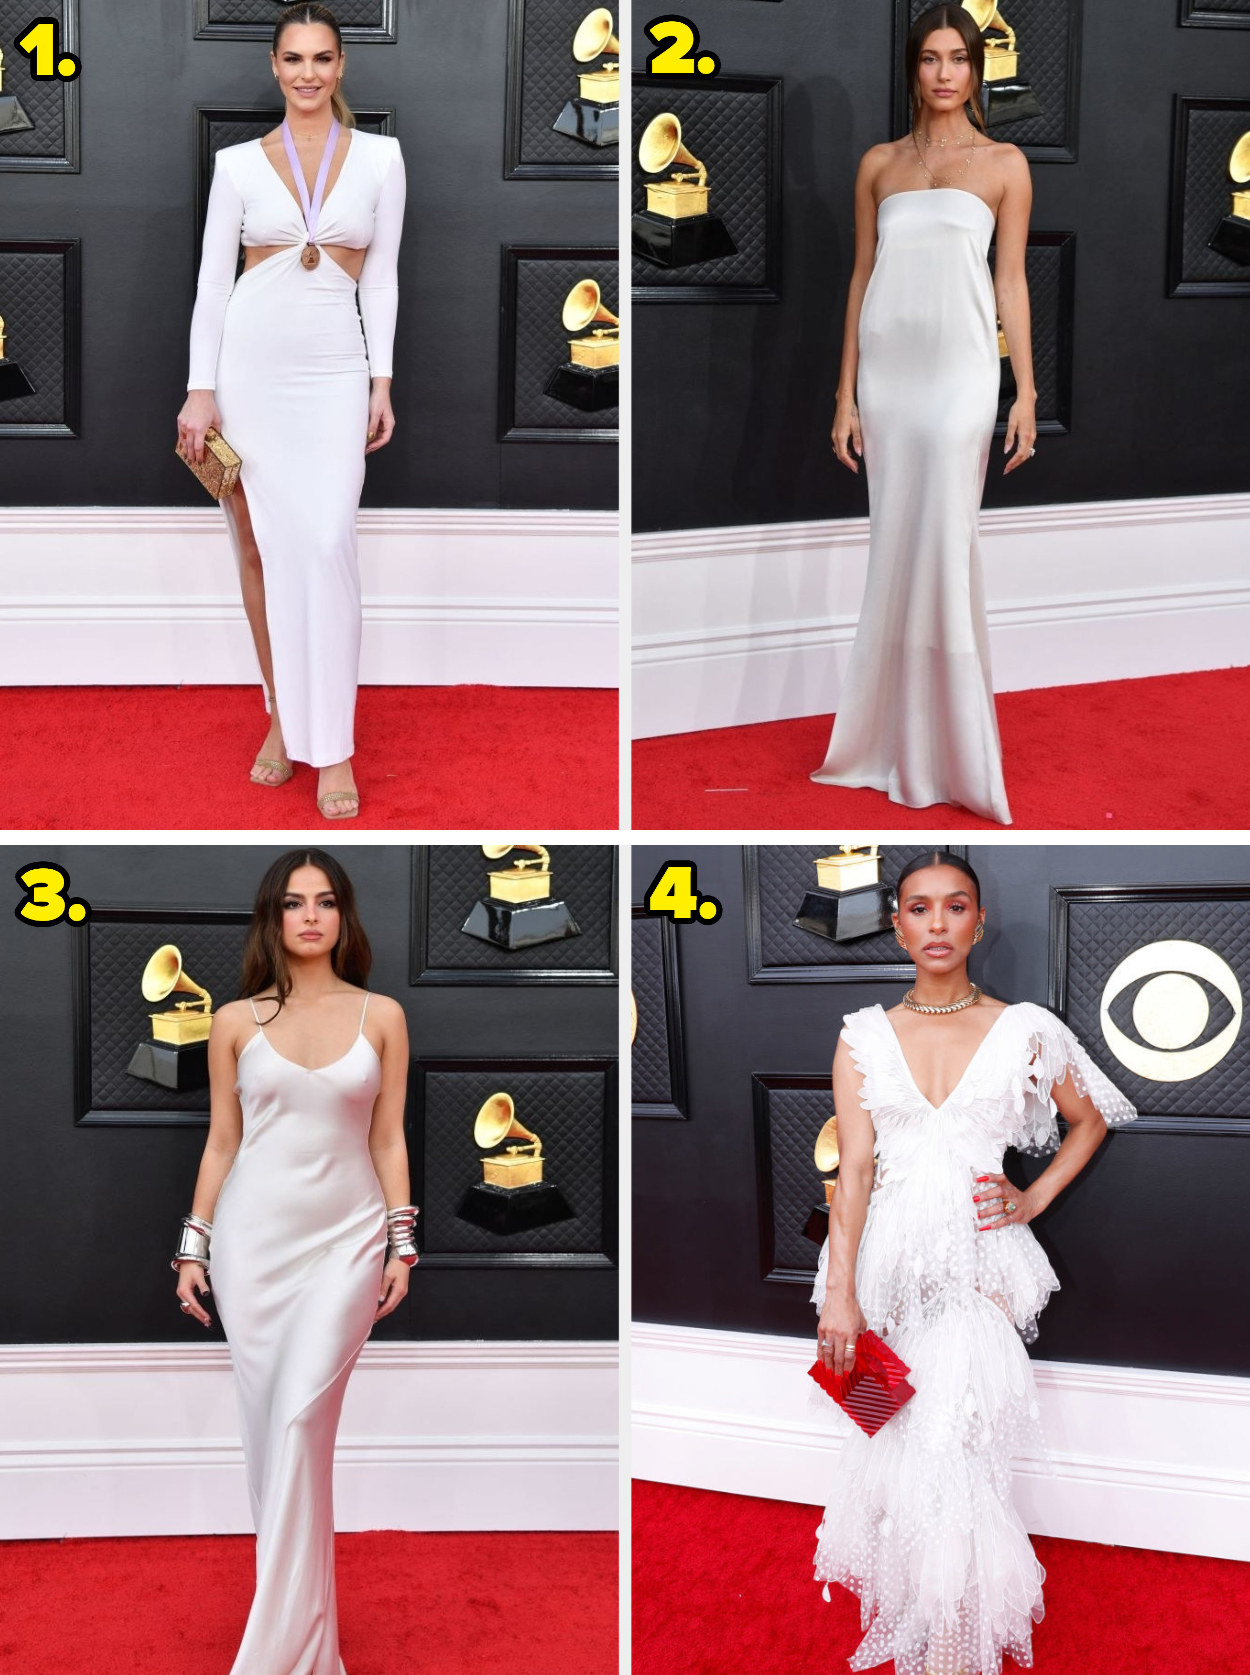 1. A long-sleeved gown with cutouts by the ribs and a strap at the neck. 2. A strapless silk dress. 3. A silk slip dress. 4. An asymmetrical gown with a pattern and jagged hem.